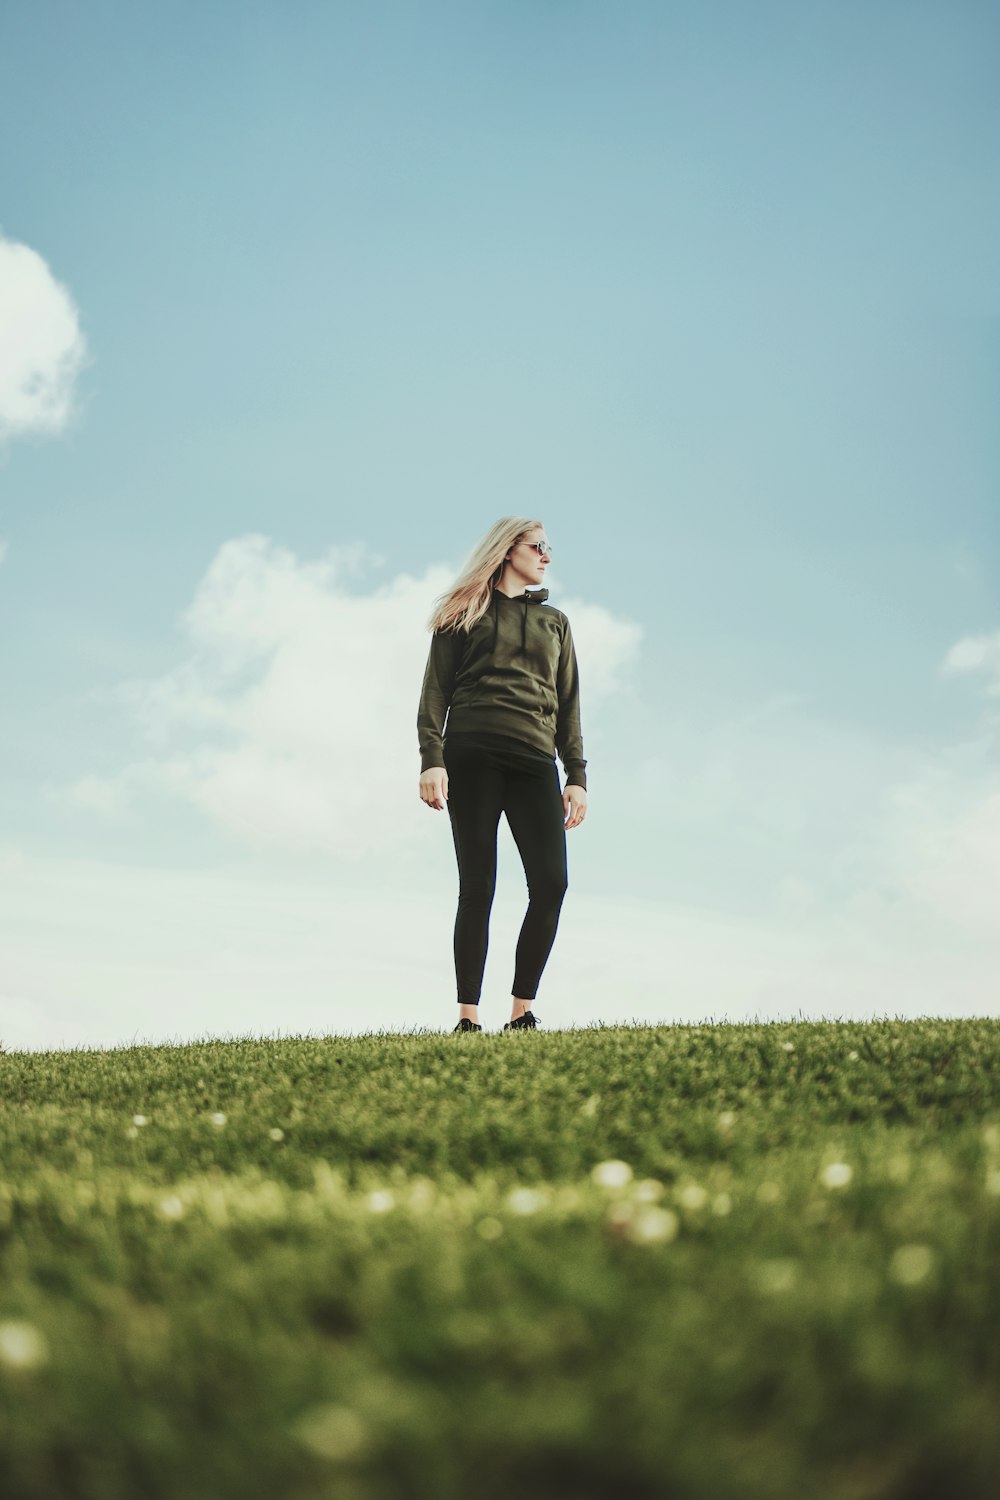 woman in black jacket standing on green grass field under blue sky during daytime